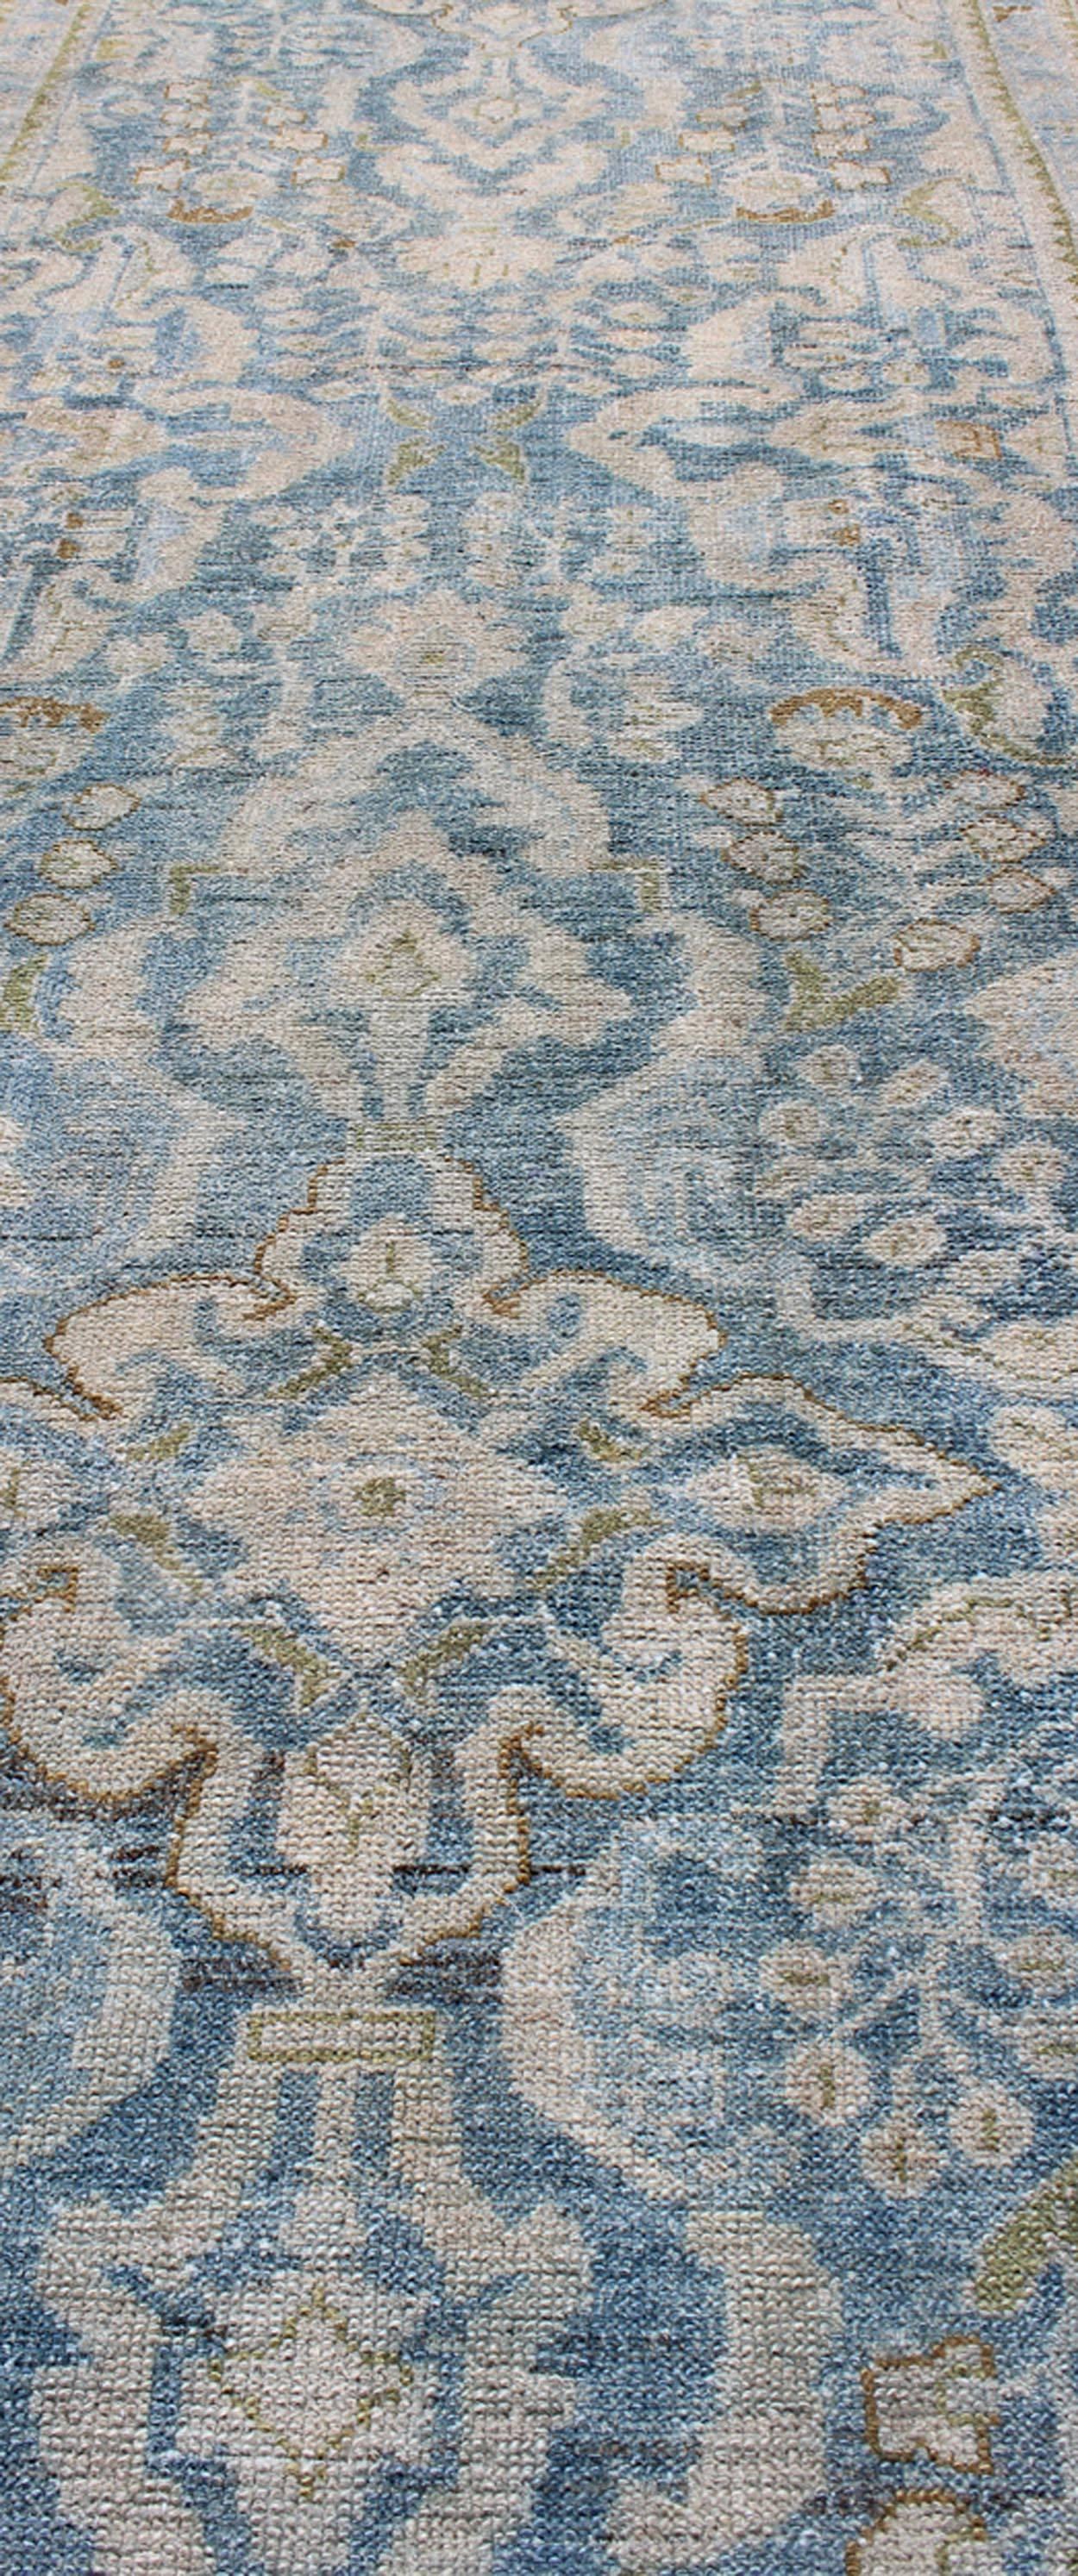 Wool Antique Persian Malayer Runner with All-Over Design in Blue and Hints of Olive